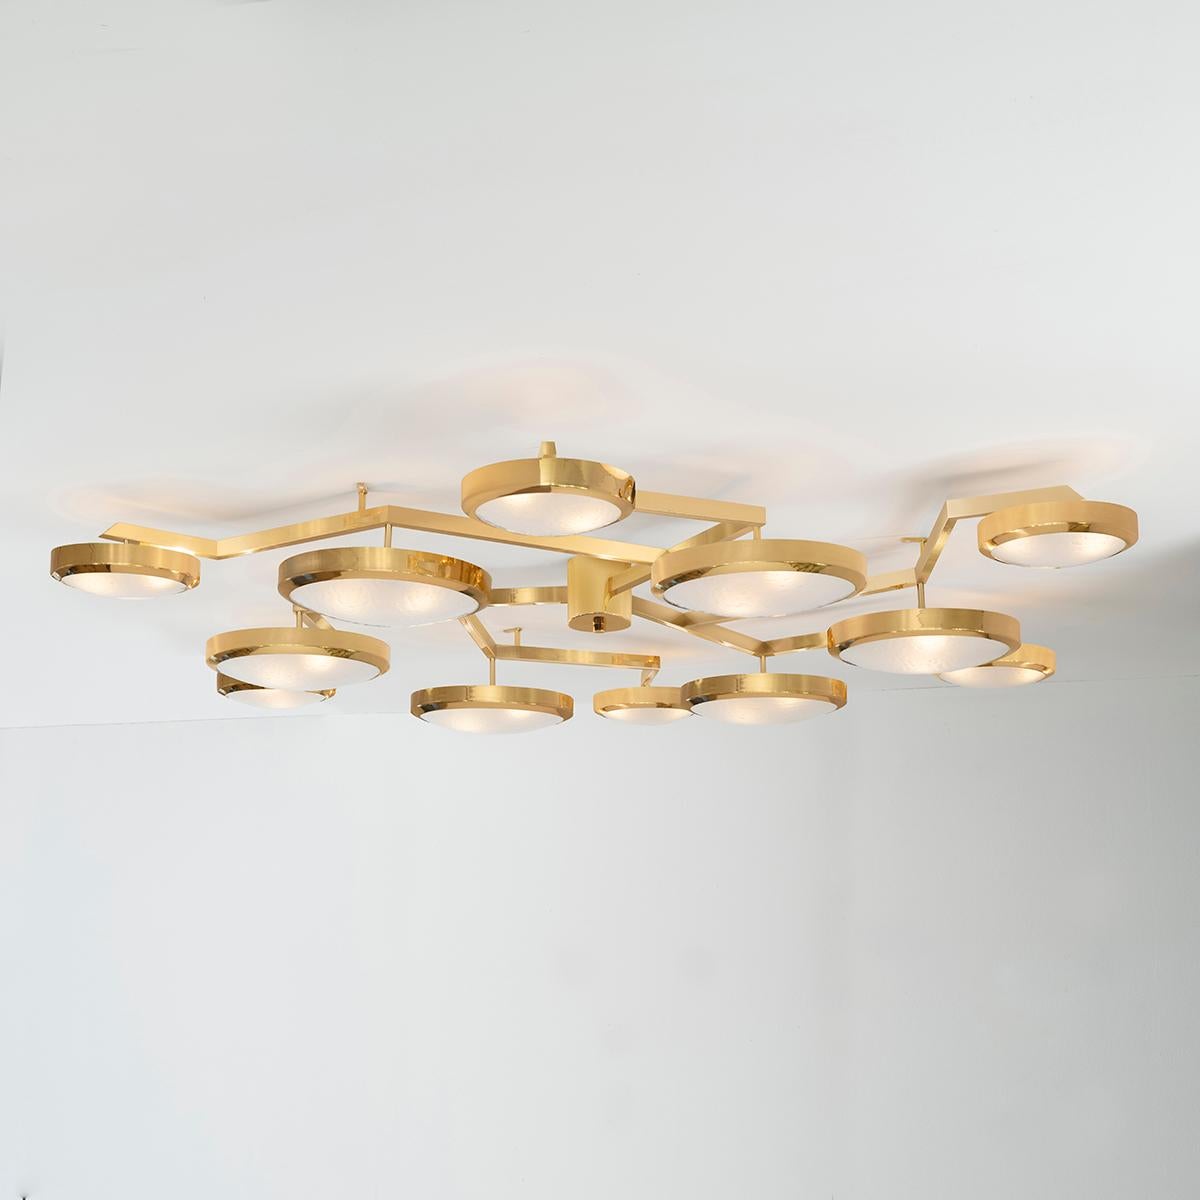 Modern Nuvola Ceiling Light by Gaspare Asaro - Polished Brass Finish For Sale